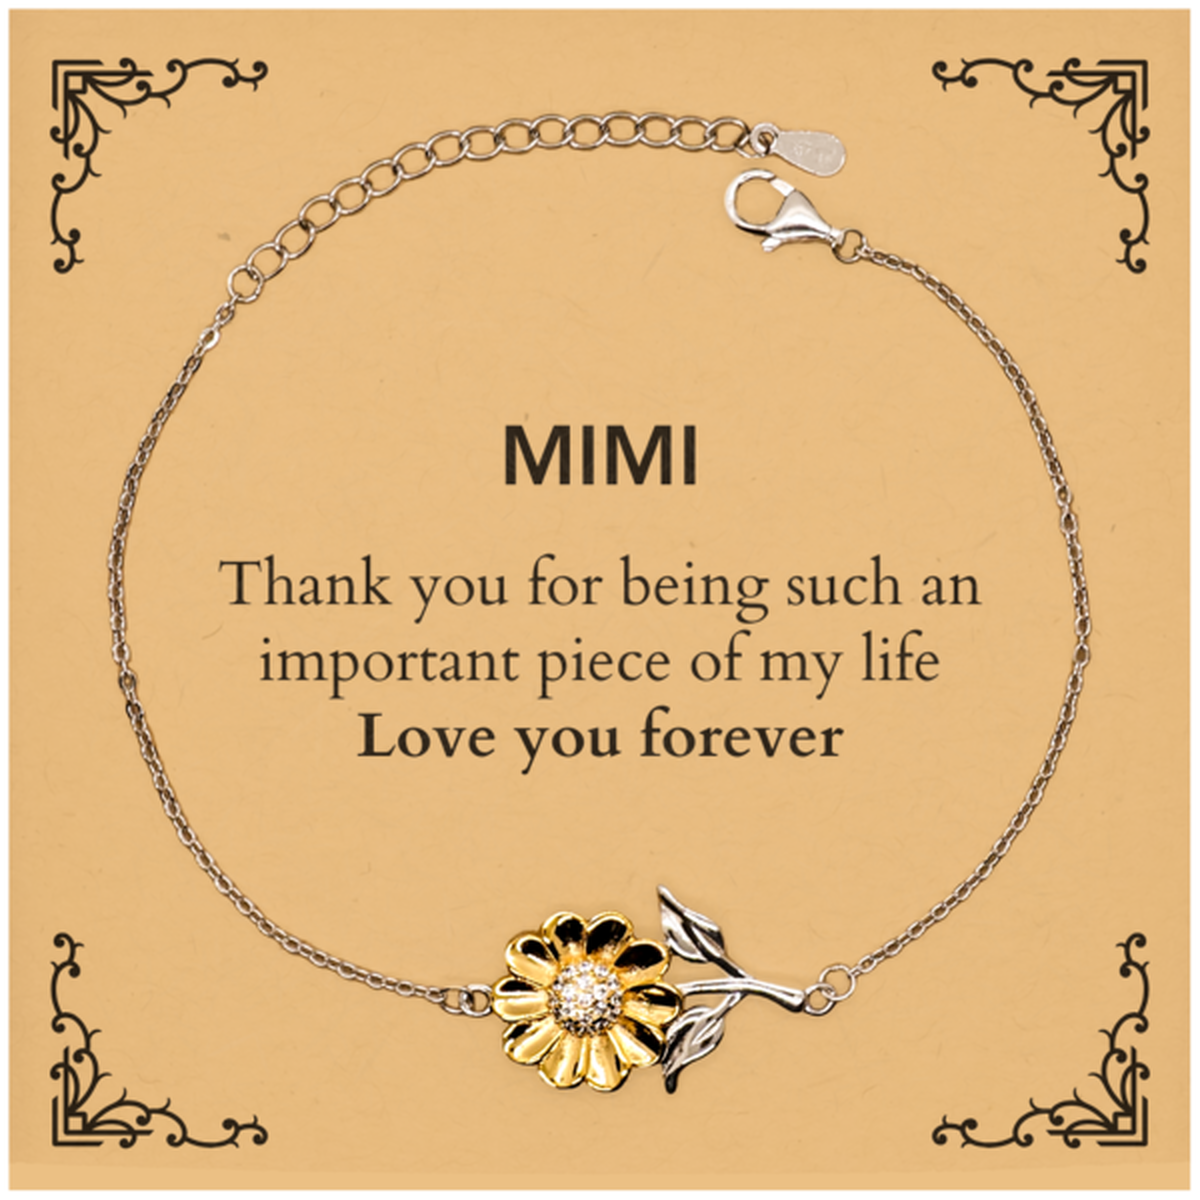 Appropriate Mimi Sunflower Bracelet Epic Birthday Gifts for Mimi Thank you for being such an important piece of my life Mimi Christmas Mothers Fathers Day